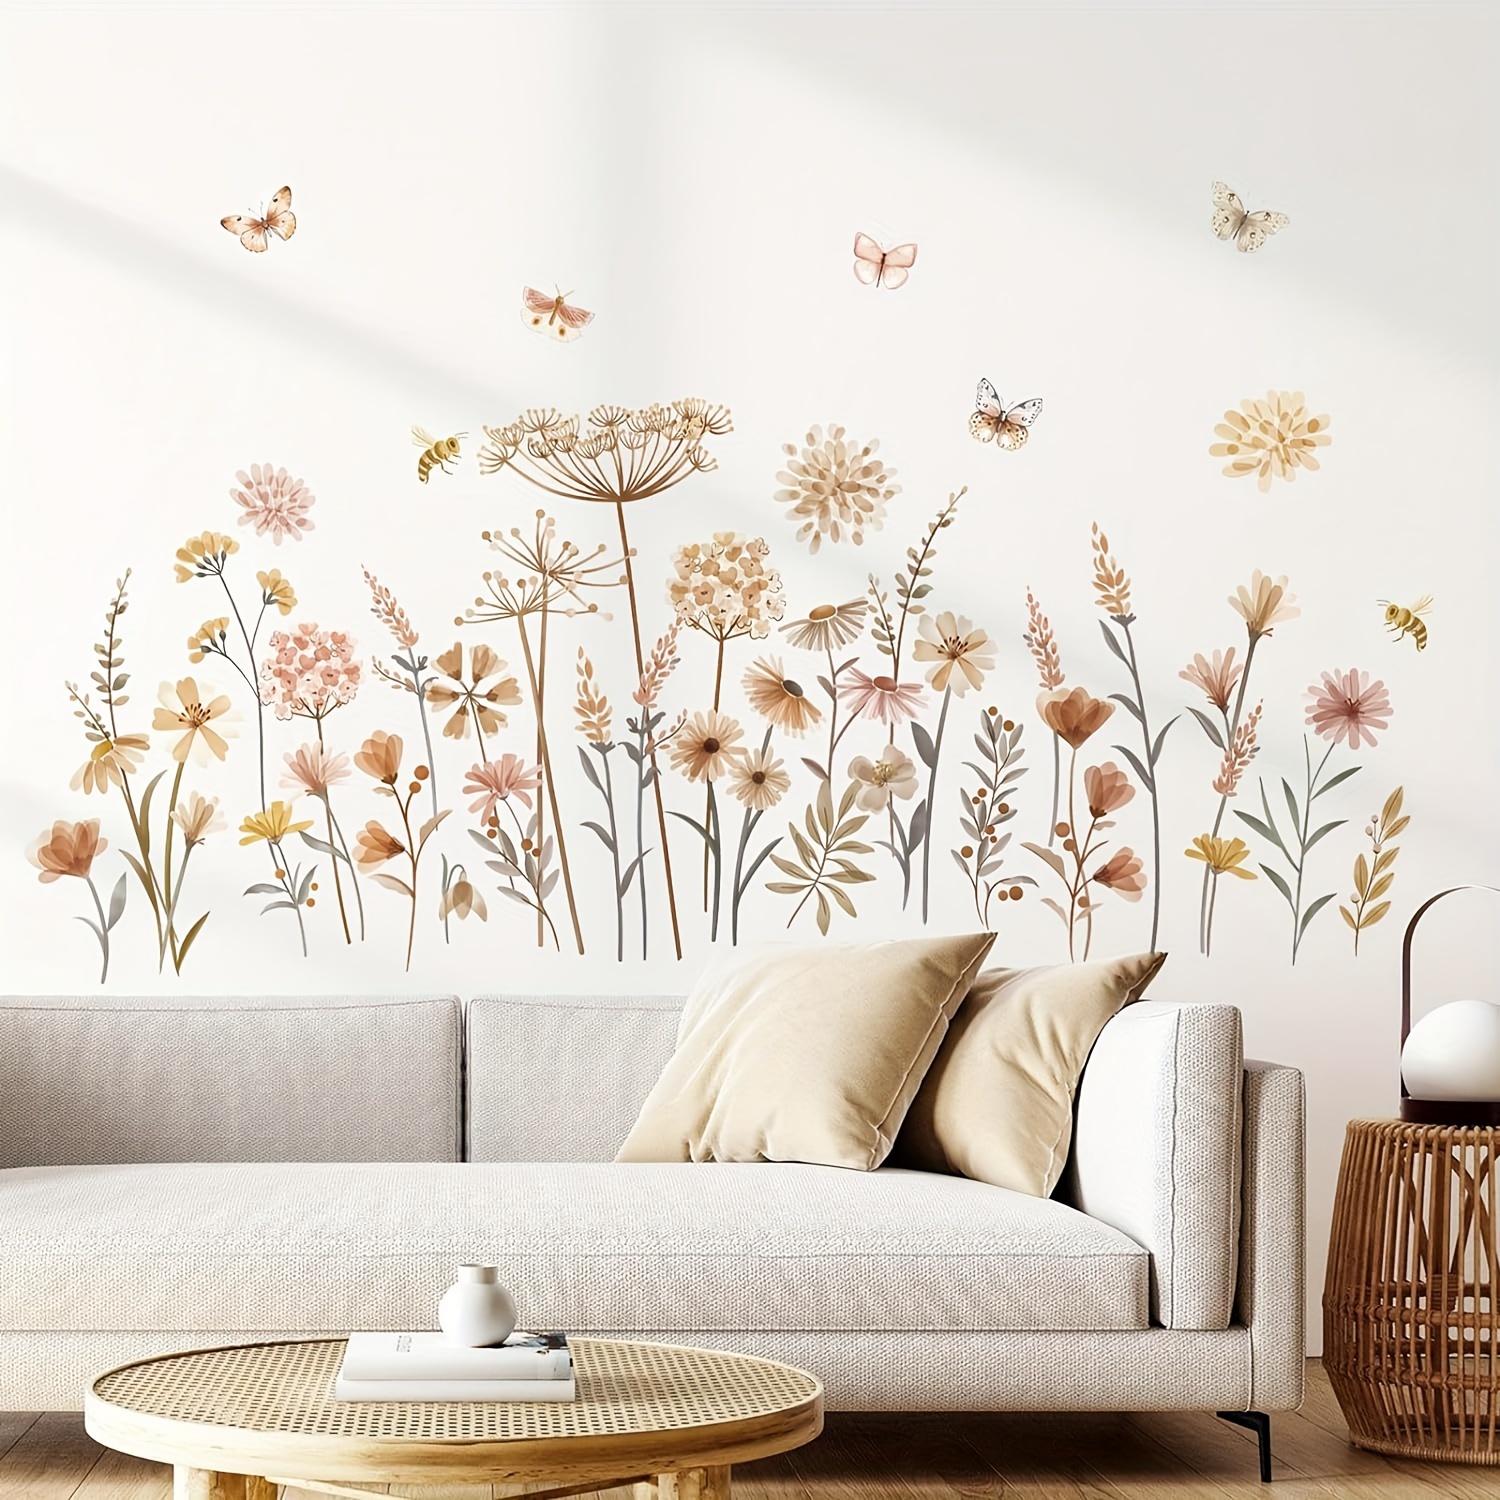 

1pc Cartoon Pvc Wall Decal, Bohemian Flower Mural, Self-adhesive Removable Wall Art Sticker For Bedroom, Classroom, Living Room, Nursery, Kindergarten, Background Wall Decor, Home Decoration